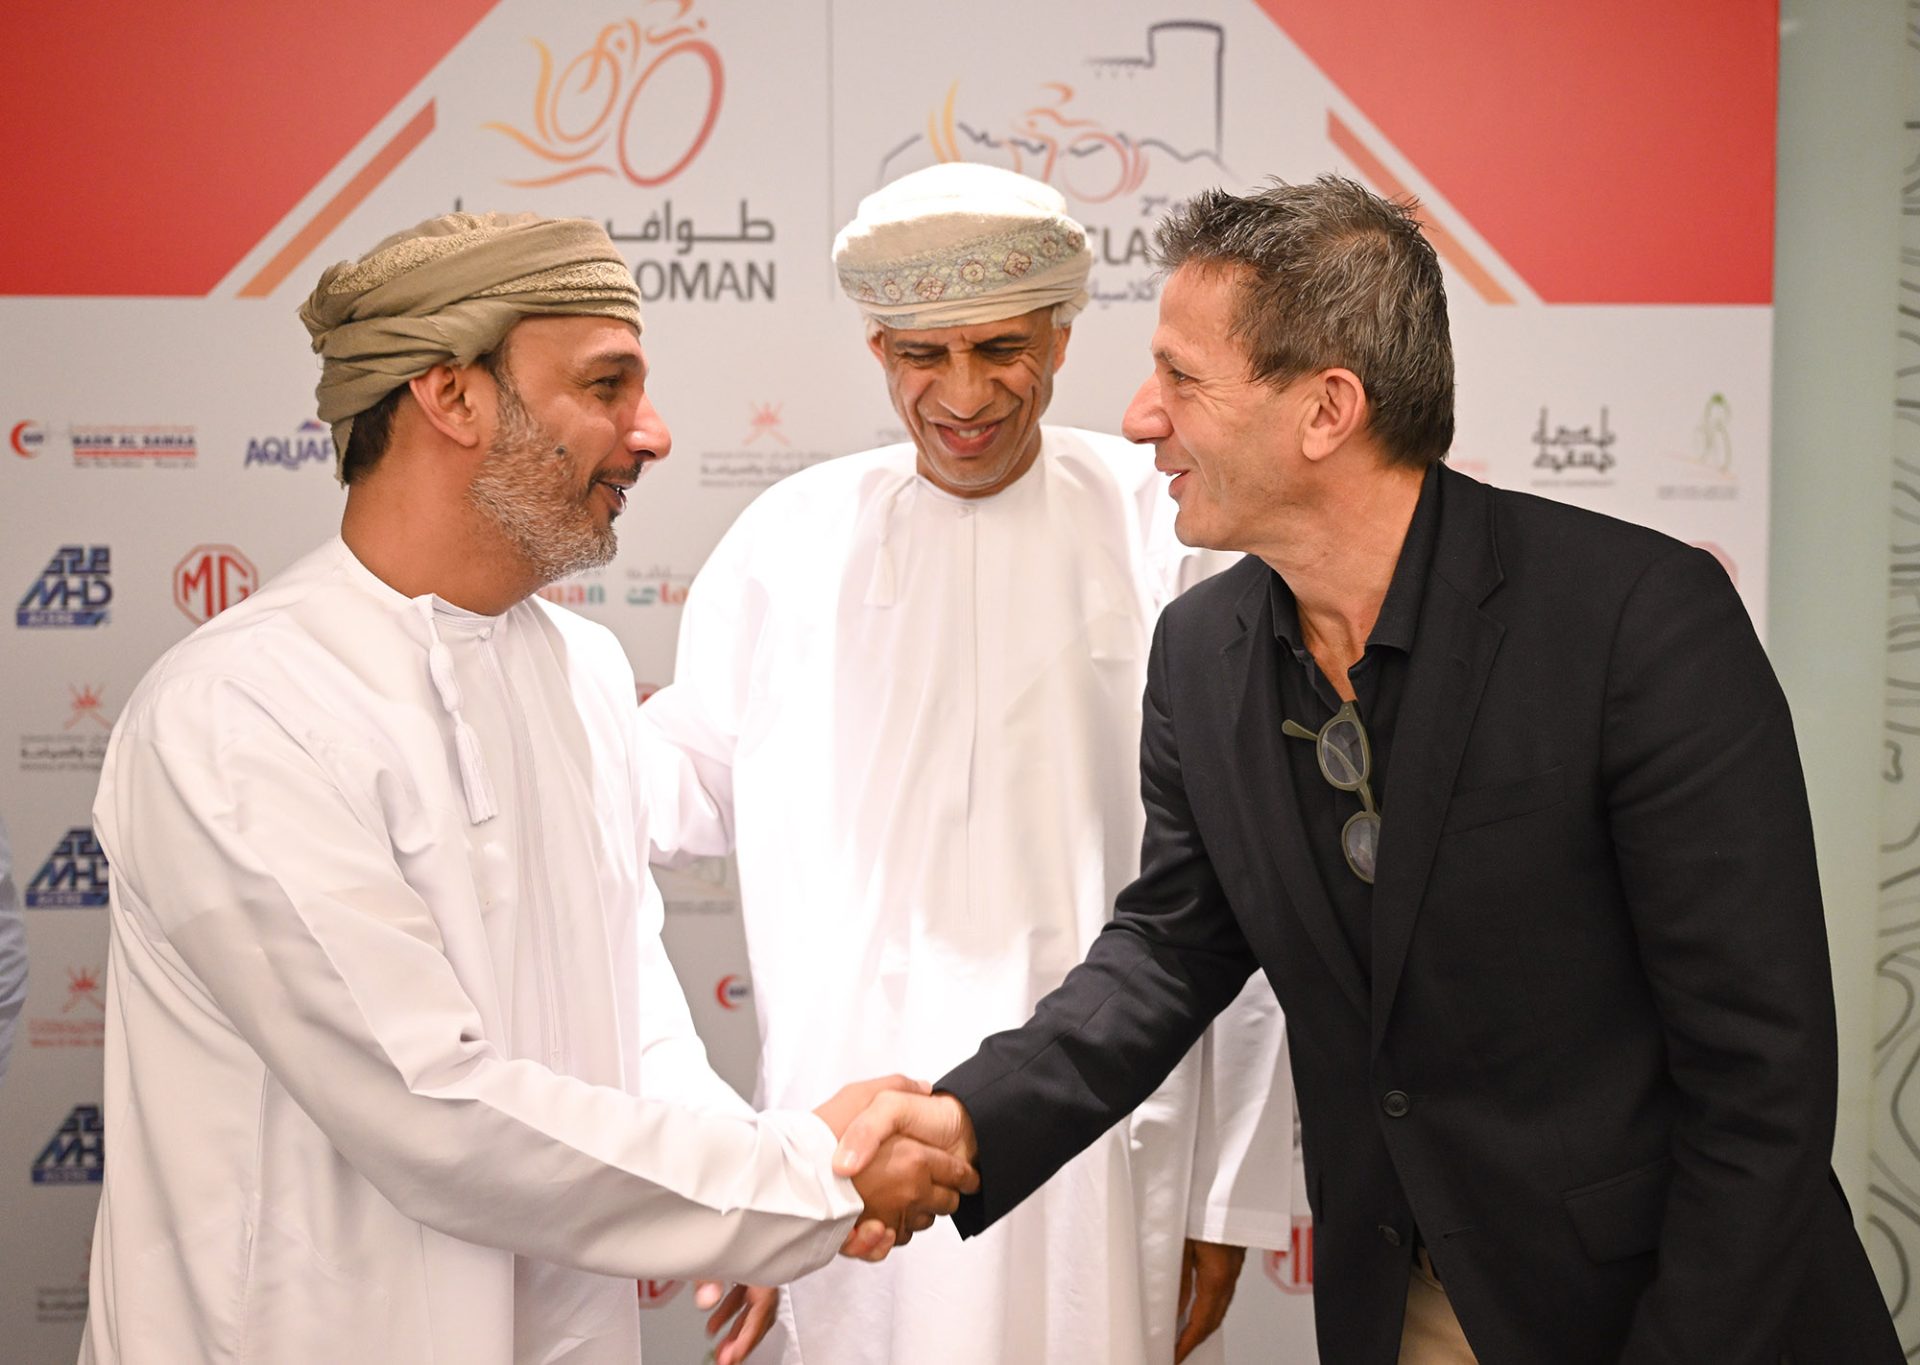 From left to right: Hisham Juma Al Sinani (General Director of Sports development at the Ministry of Culture, Sports and Youth), Saif Al Rushaidi (President of the Oman Cycling Association), Yann Le Moenner (CEO of A.S.O.)